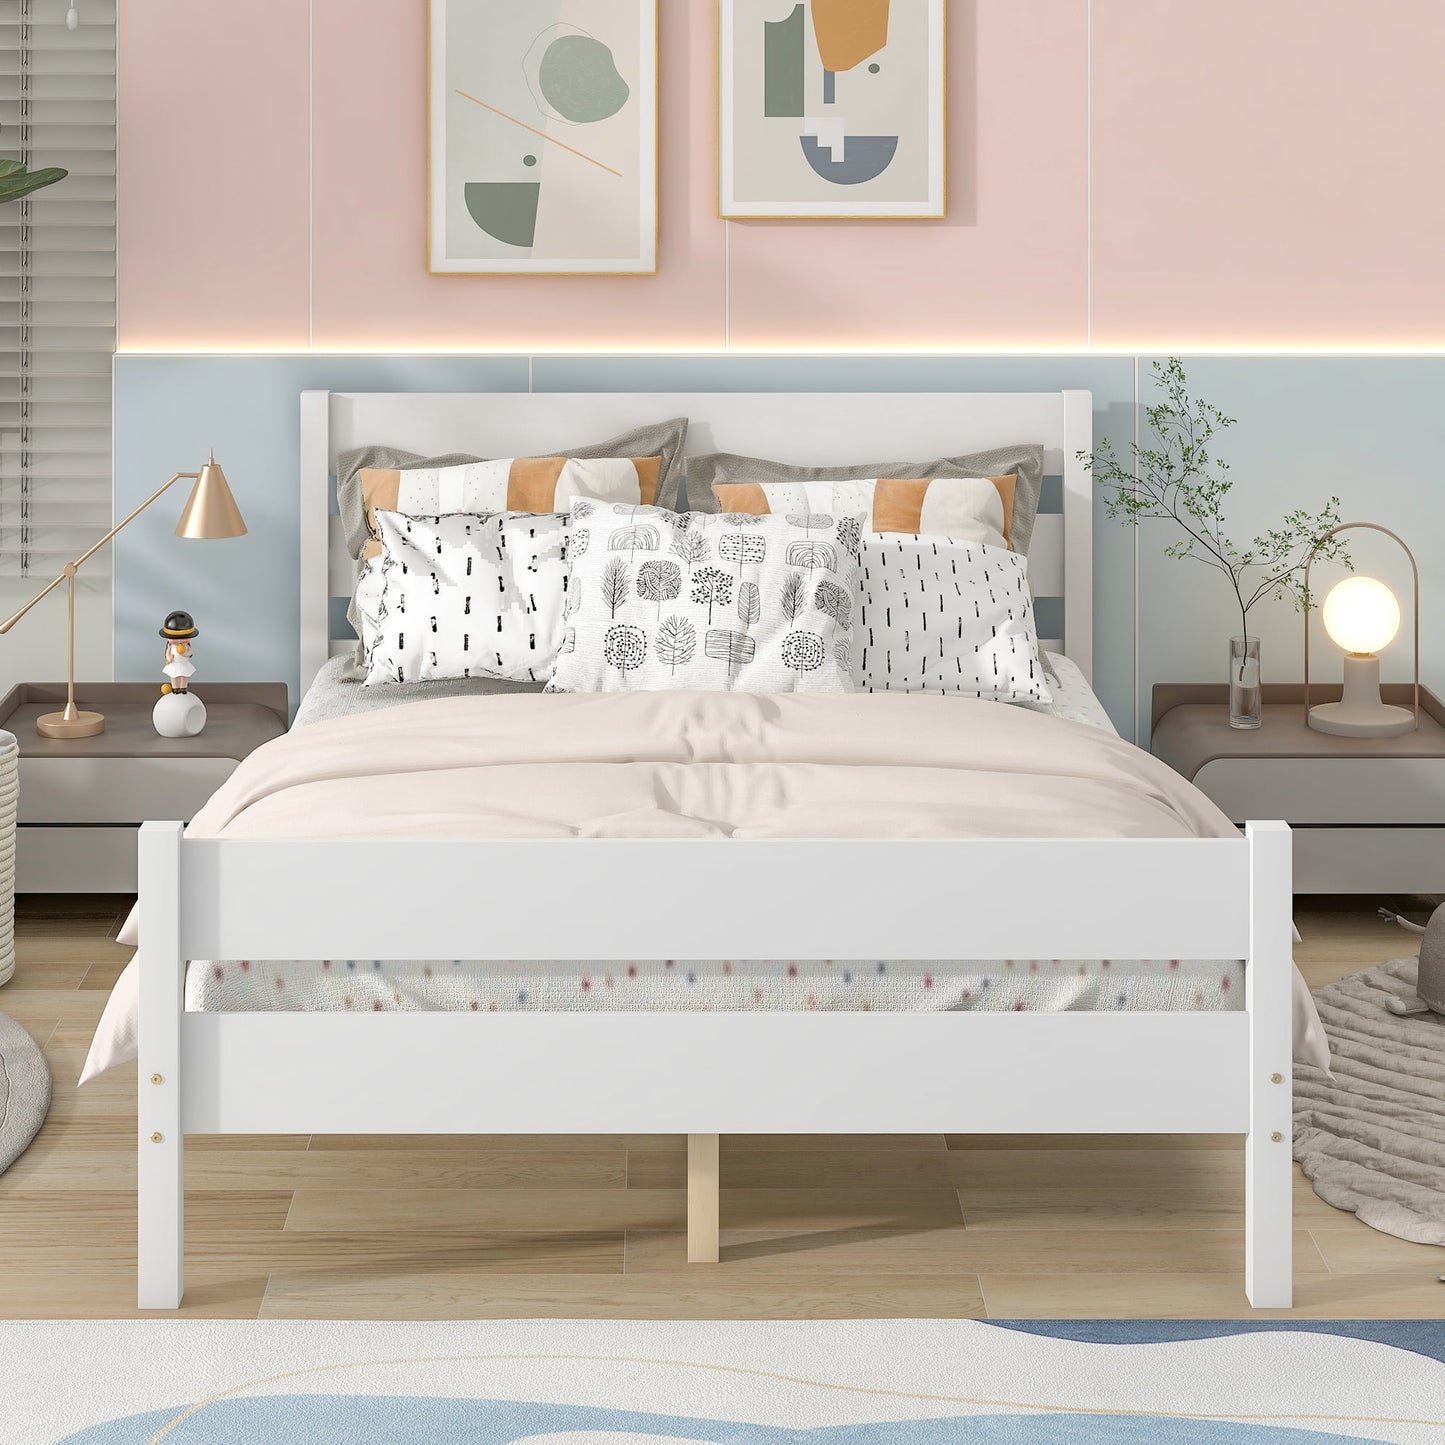 Wood Kids Full Platform Bed Frame with Headboard and Footboard for Boys Girls Teens Adults, White, LJ798